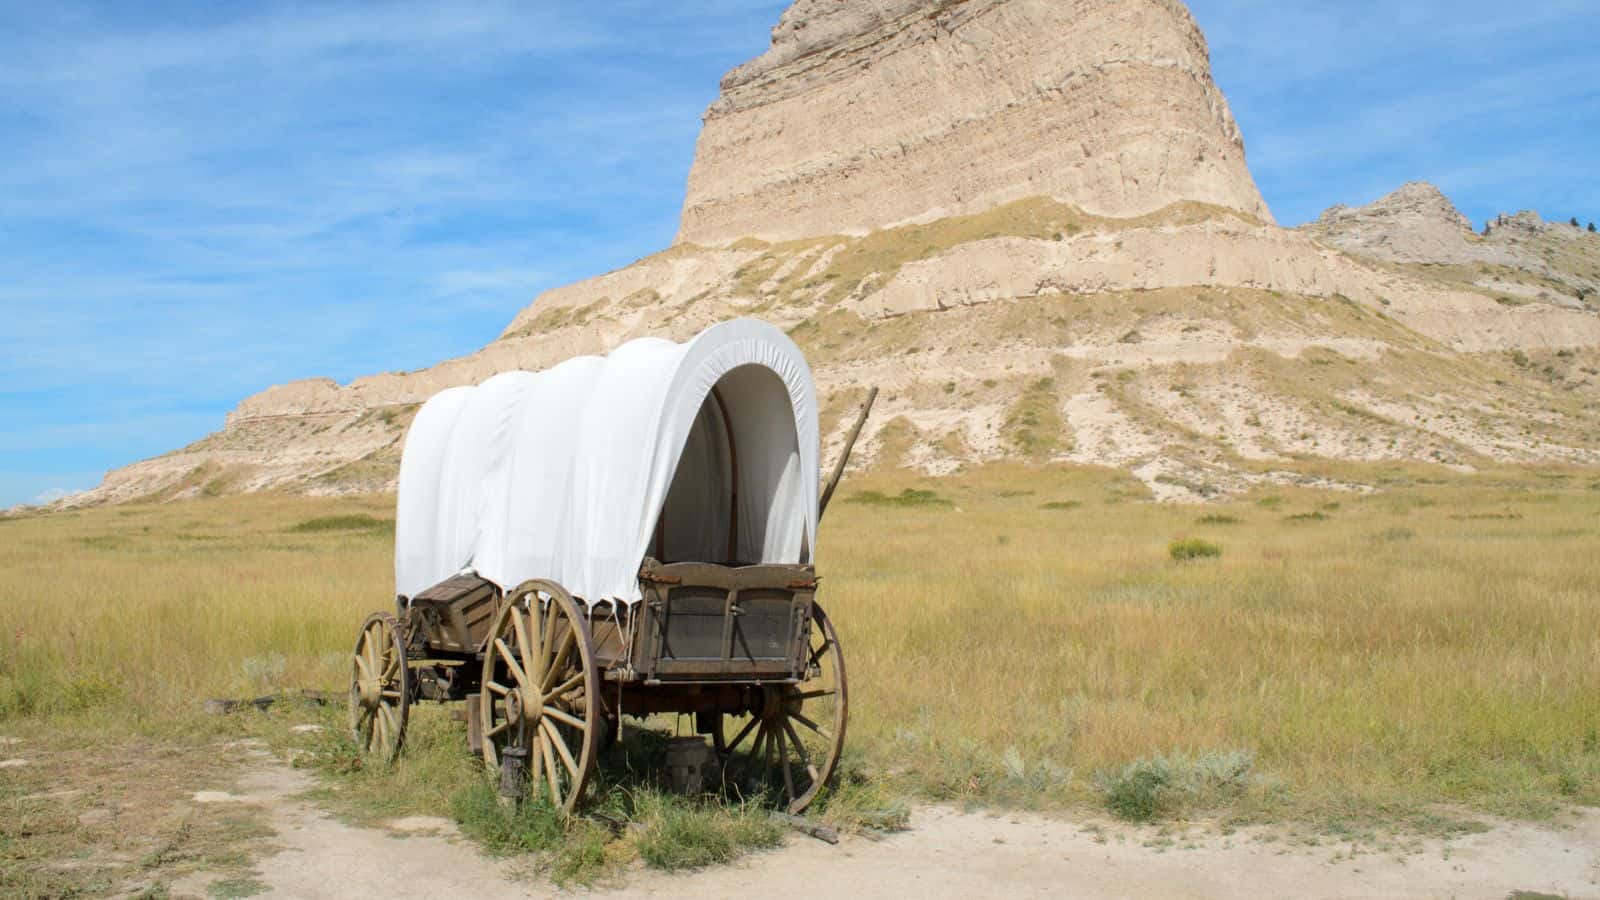 <p>Trace the historic Oregon Trail from Oregon to Wyoming, exploring landmarks, museums, and breathtaking natural landscapes along the way.</p><p>This 2,000-mile route follows the path of the Oregon Trail, a historic route used by pioneers traveling west during the 19th century. Historic sites like Fort Laramie, Independence Rock, and the Oregon Trail Ruts, along with landscapes such as the Snake River and the National Historic Oregon Trail Interpretive Center are among the best things to do while on your way.</p><p>The Oregon Trail offers a unique opportunity to step back in time and experience the challenges and adventures faced by early American settlers.</p>